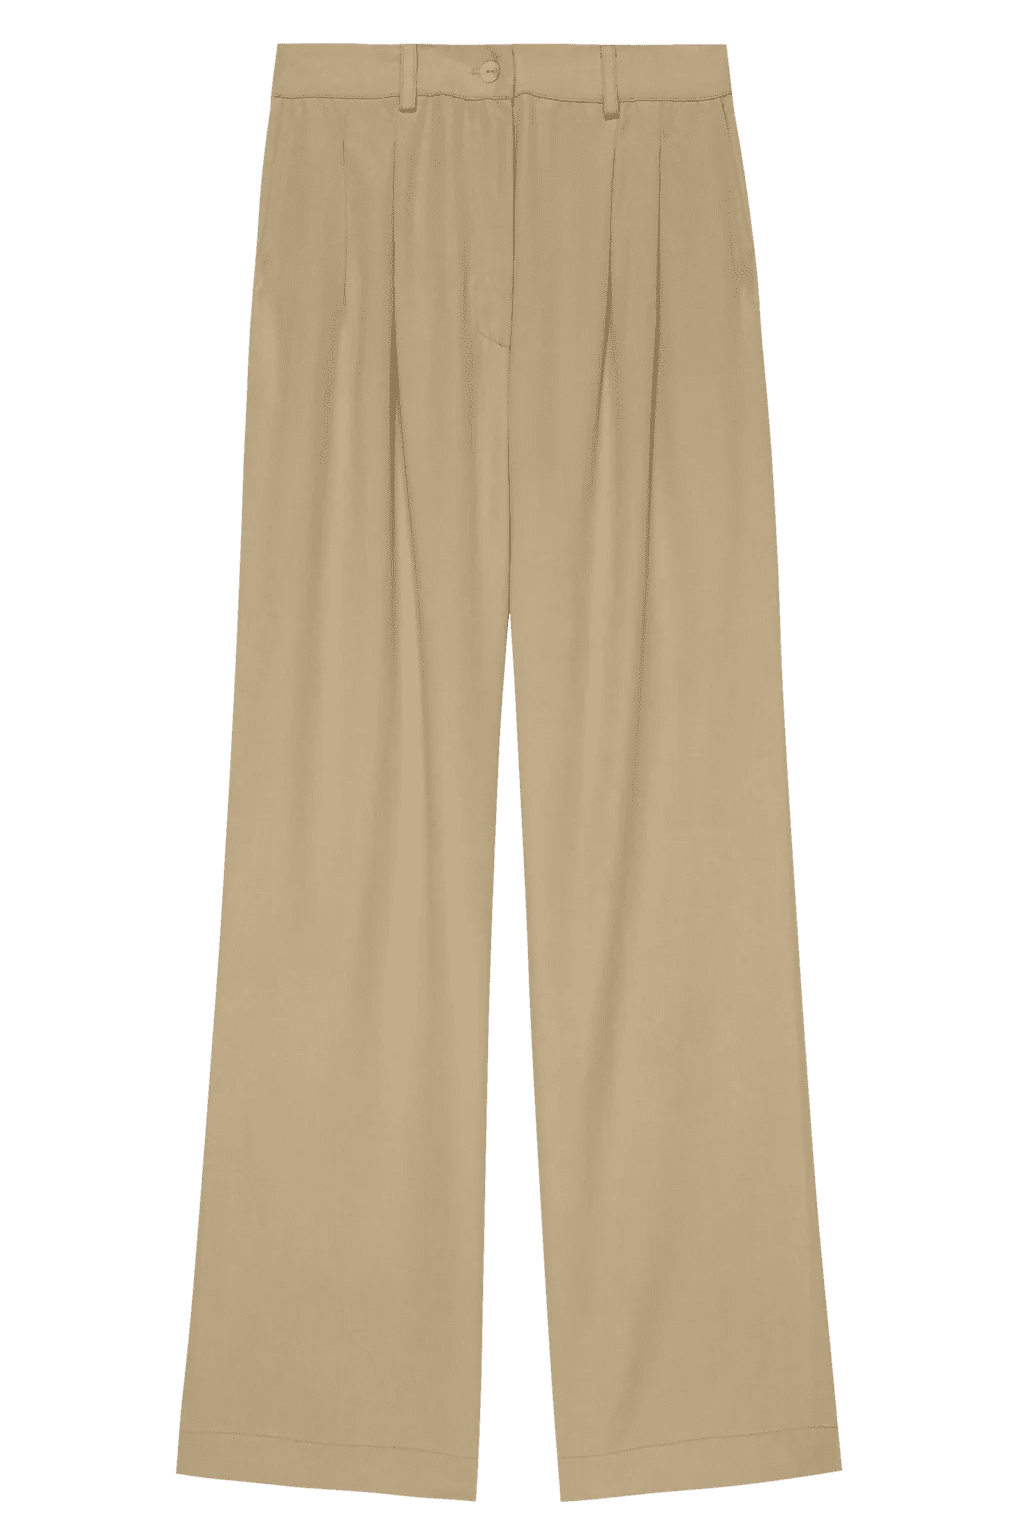 Billie Boutique Donni - Twill Pleated Pant Sand